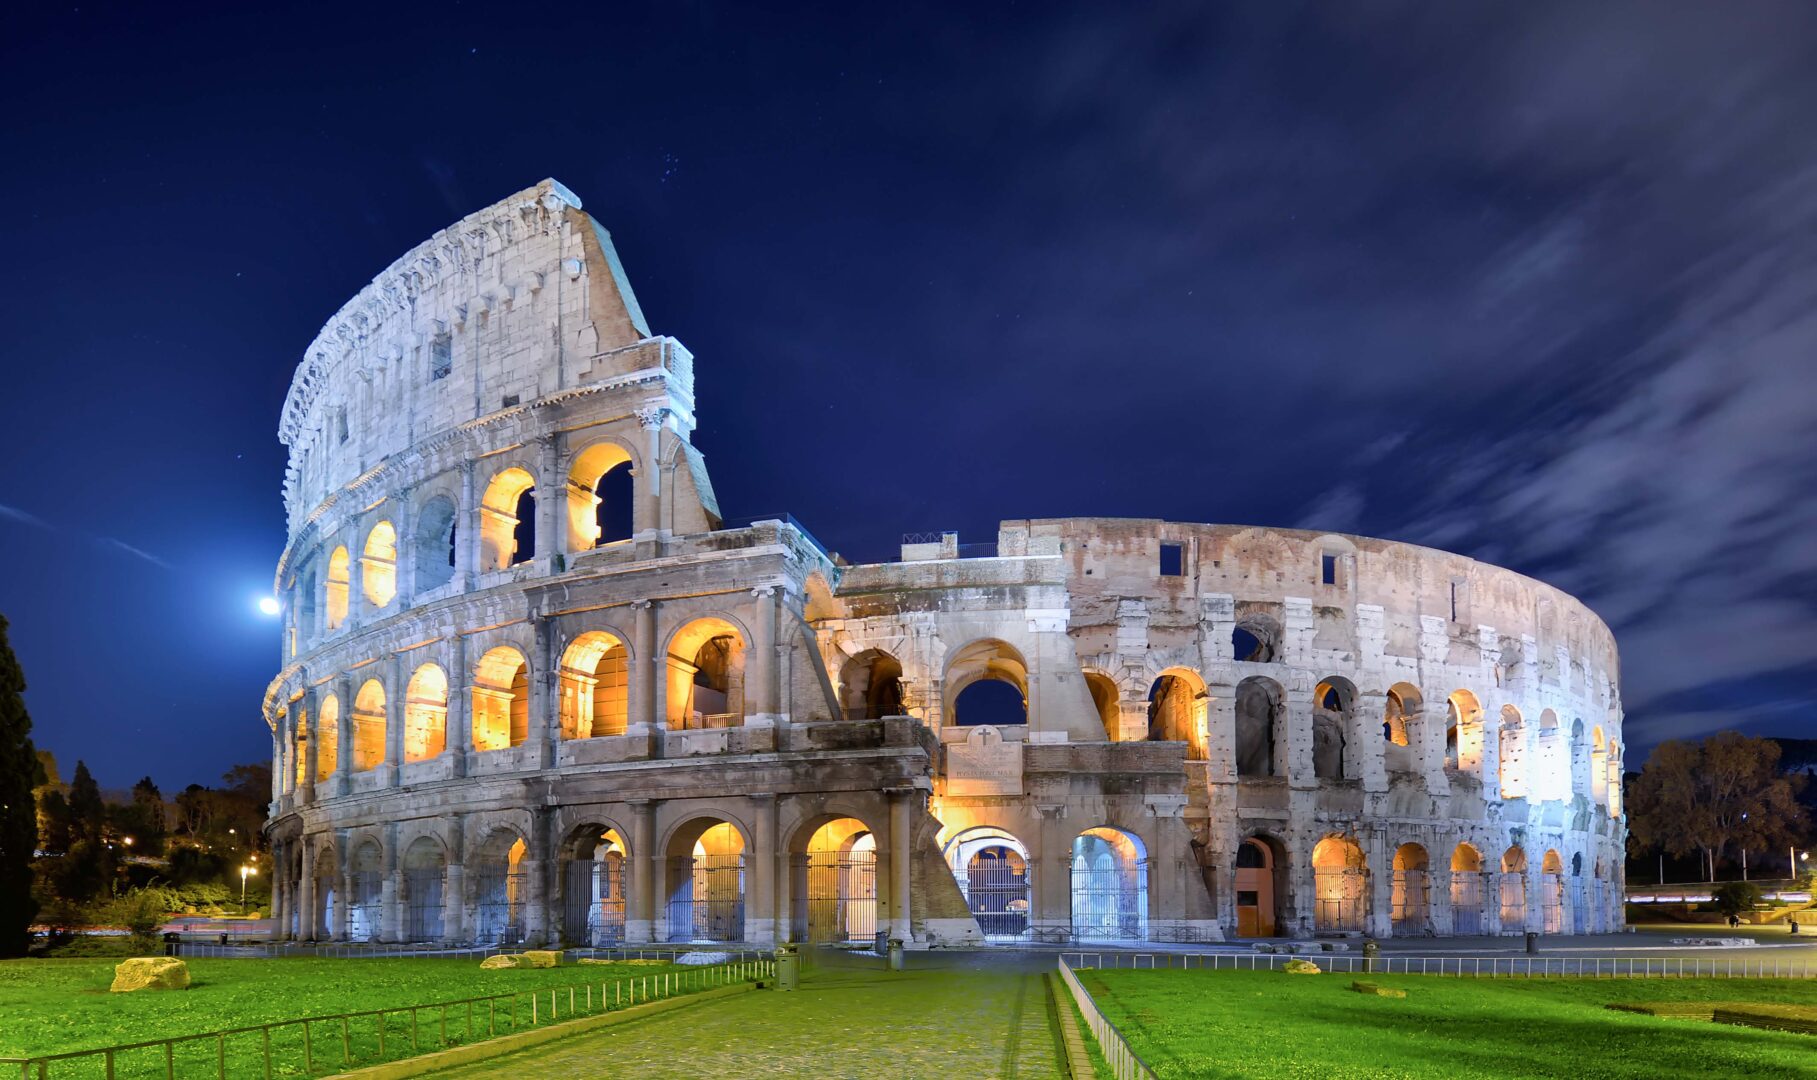 Plan Your Visit to Colosseum at Night